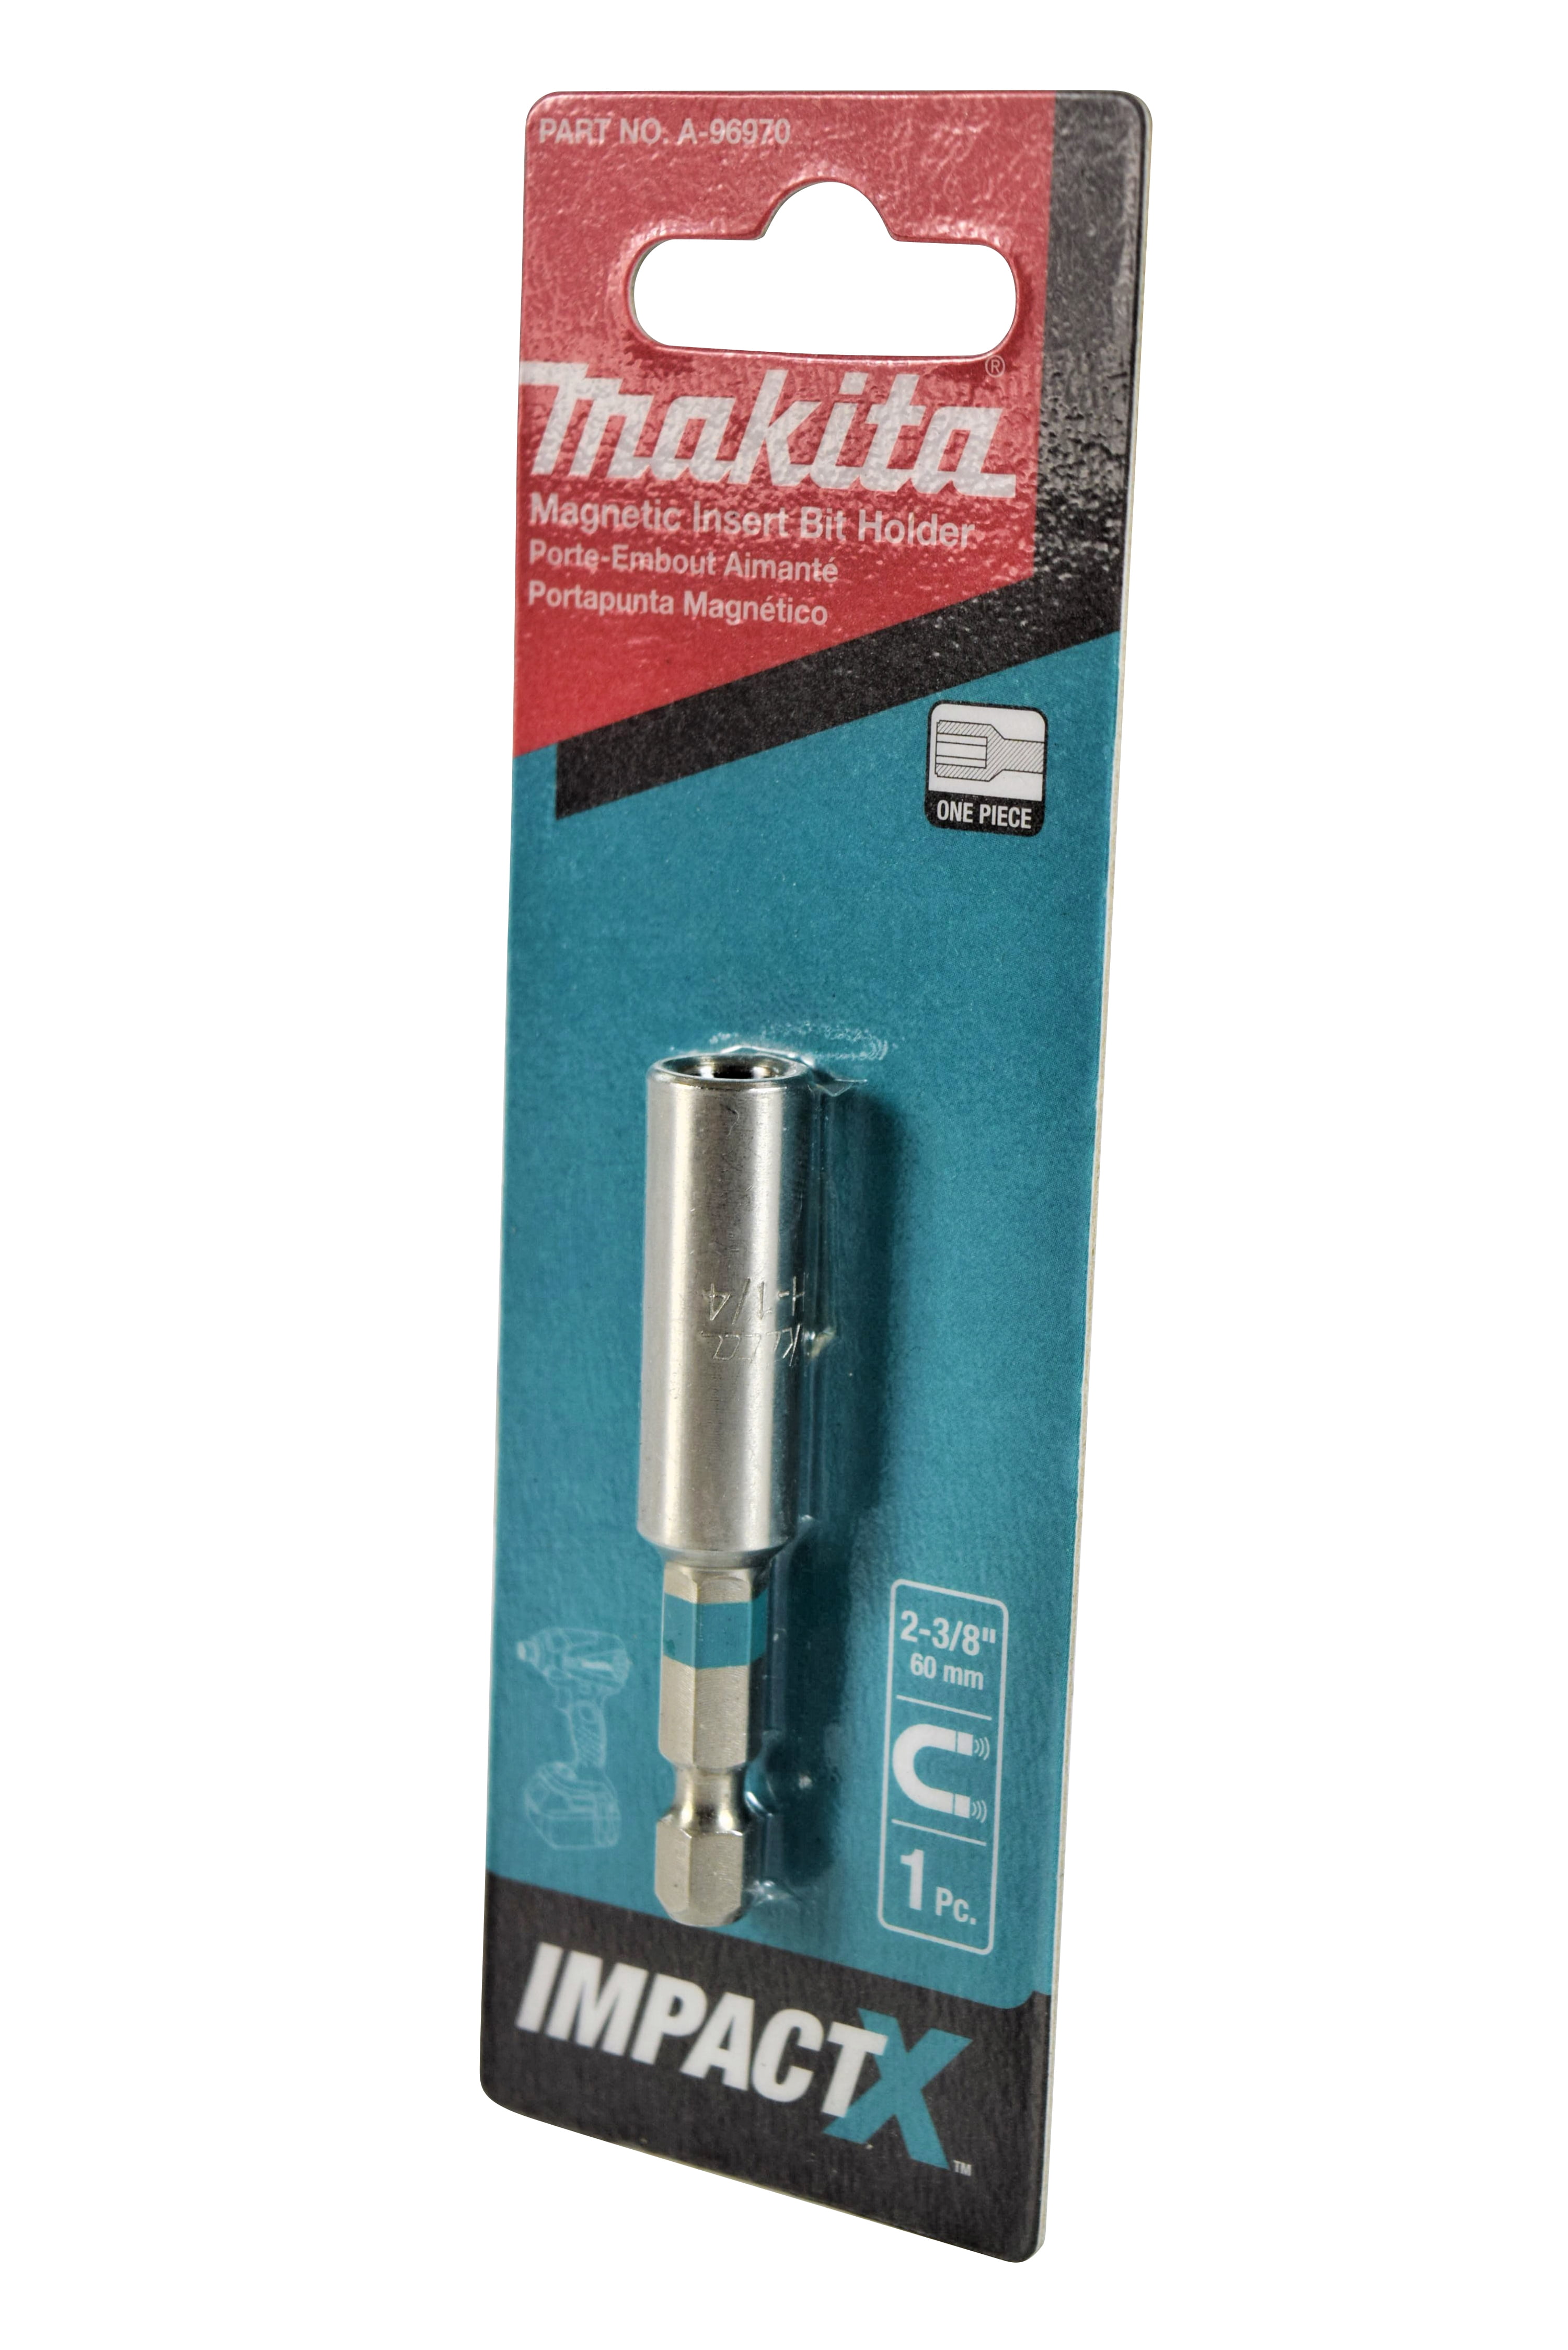 2 Pack StealthMounts Makita Black Magnetic Bit Holder Drill Bit Organizer Perfect for Makita Drills and Impacts